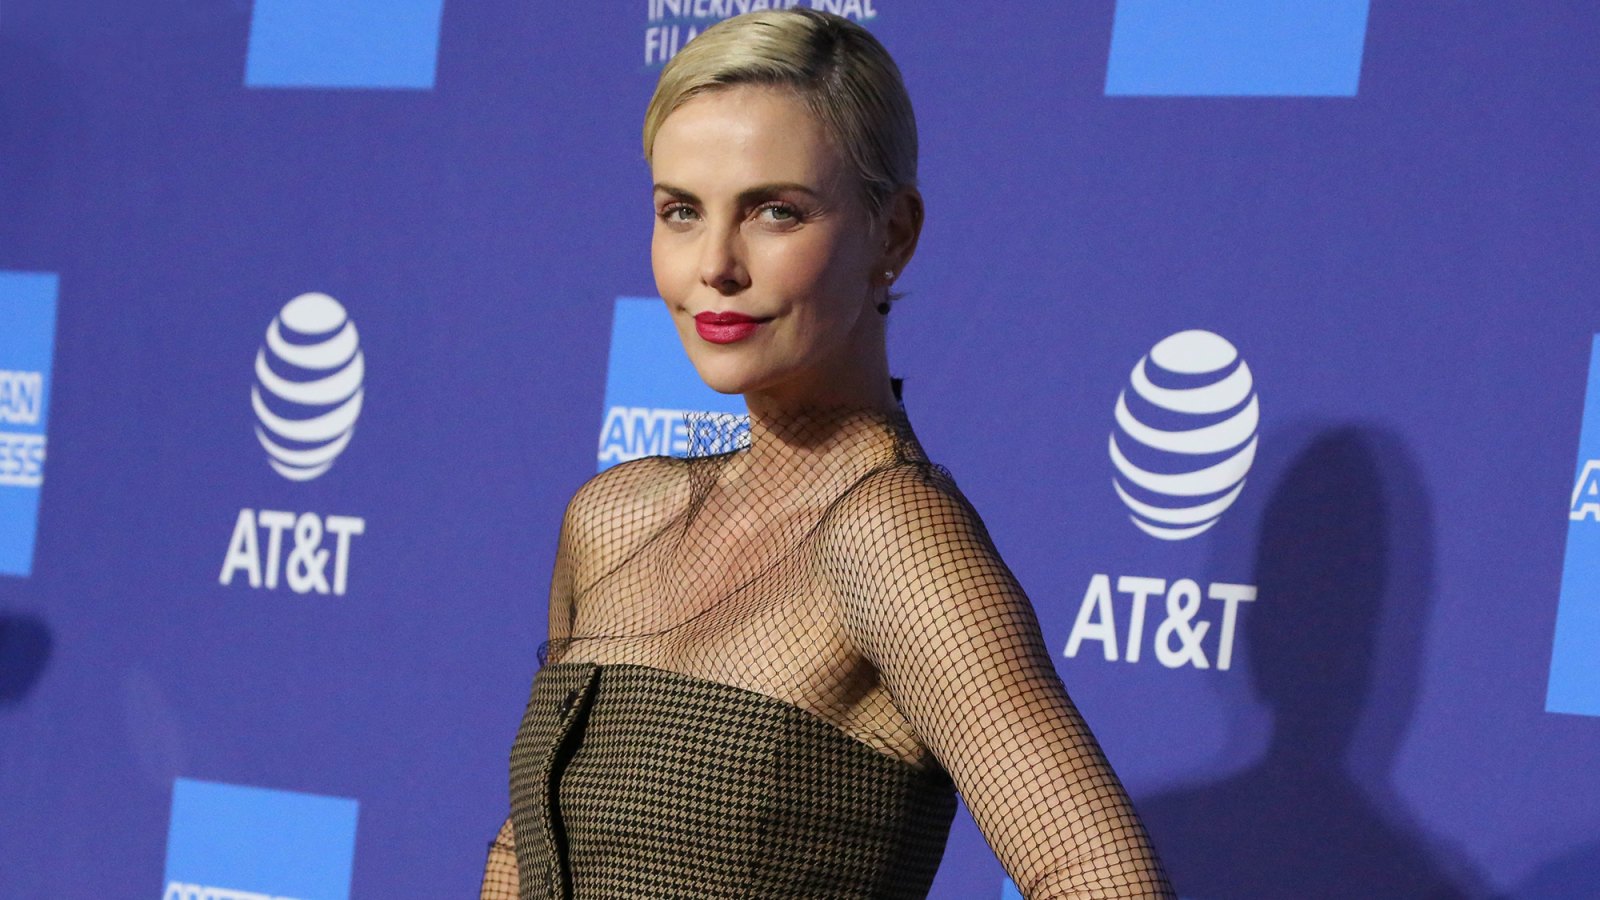 Charlize Theron Jokes She Drank Herself ‘Into a Daytime Coma’ While on School Field Trip With Kids